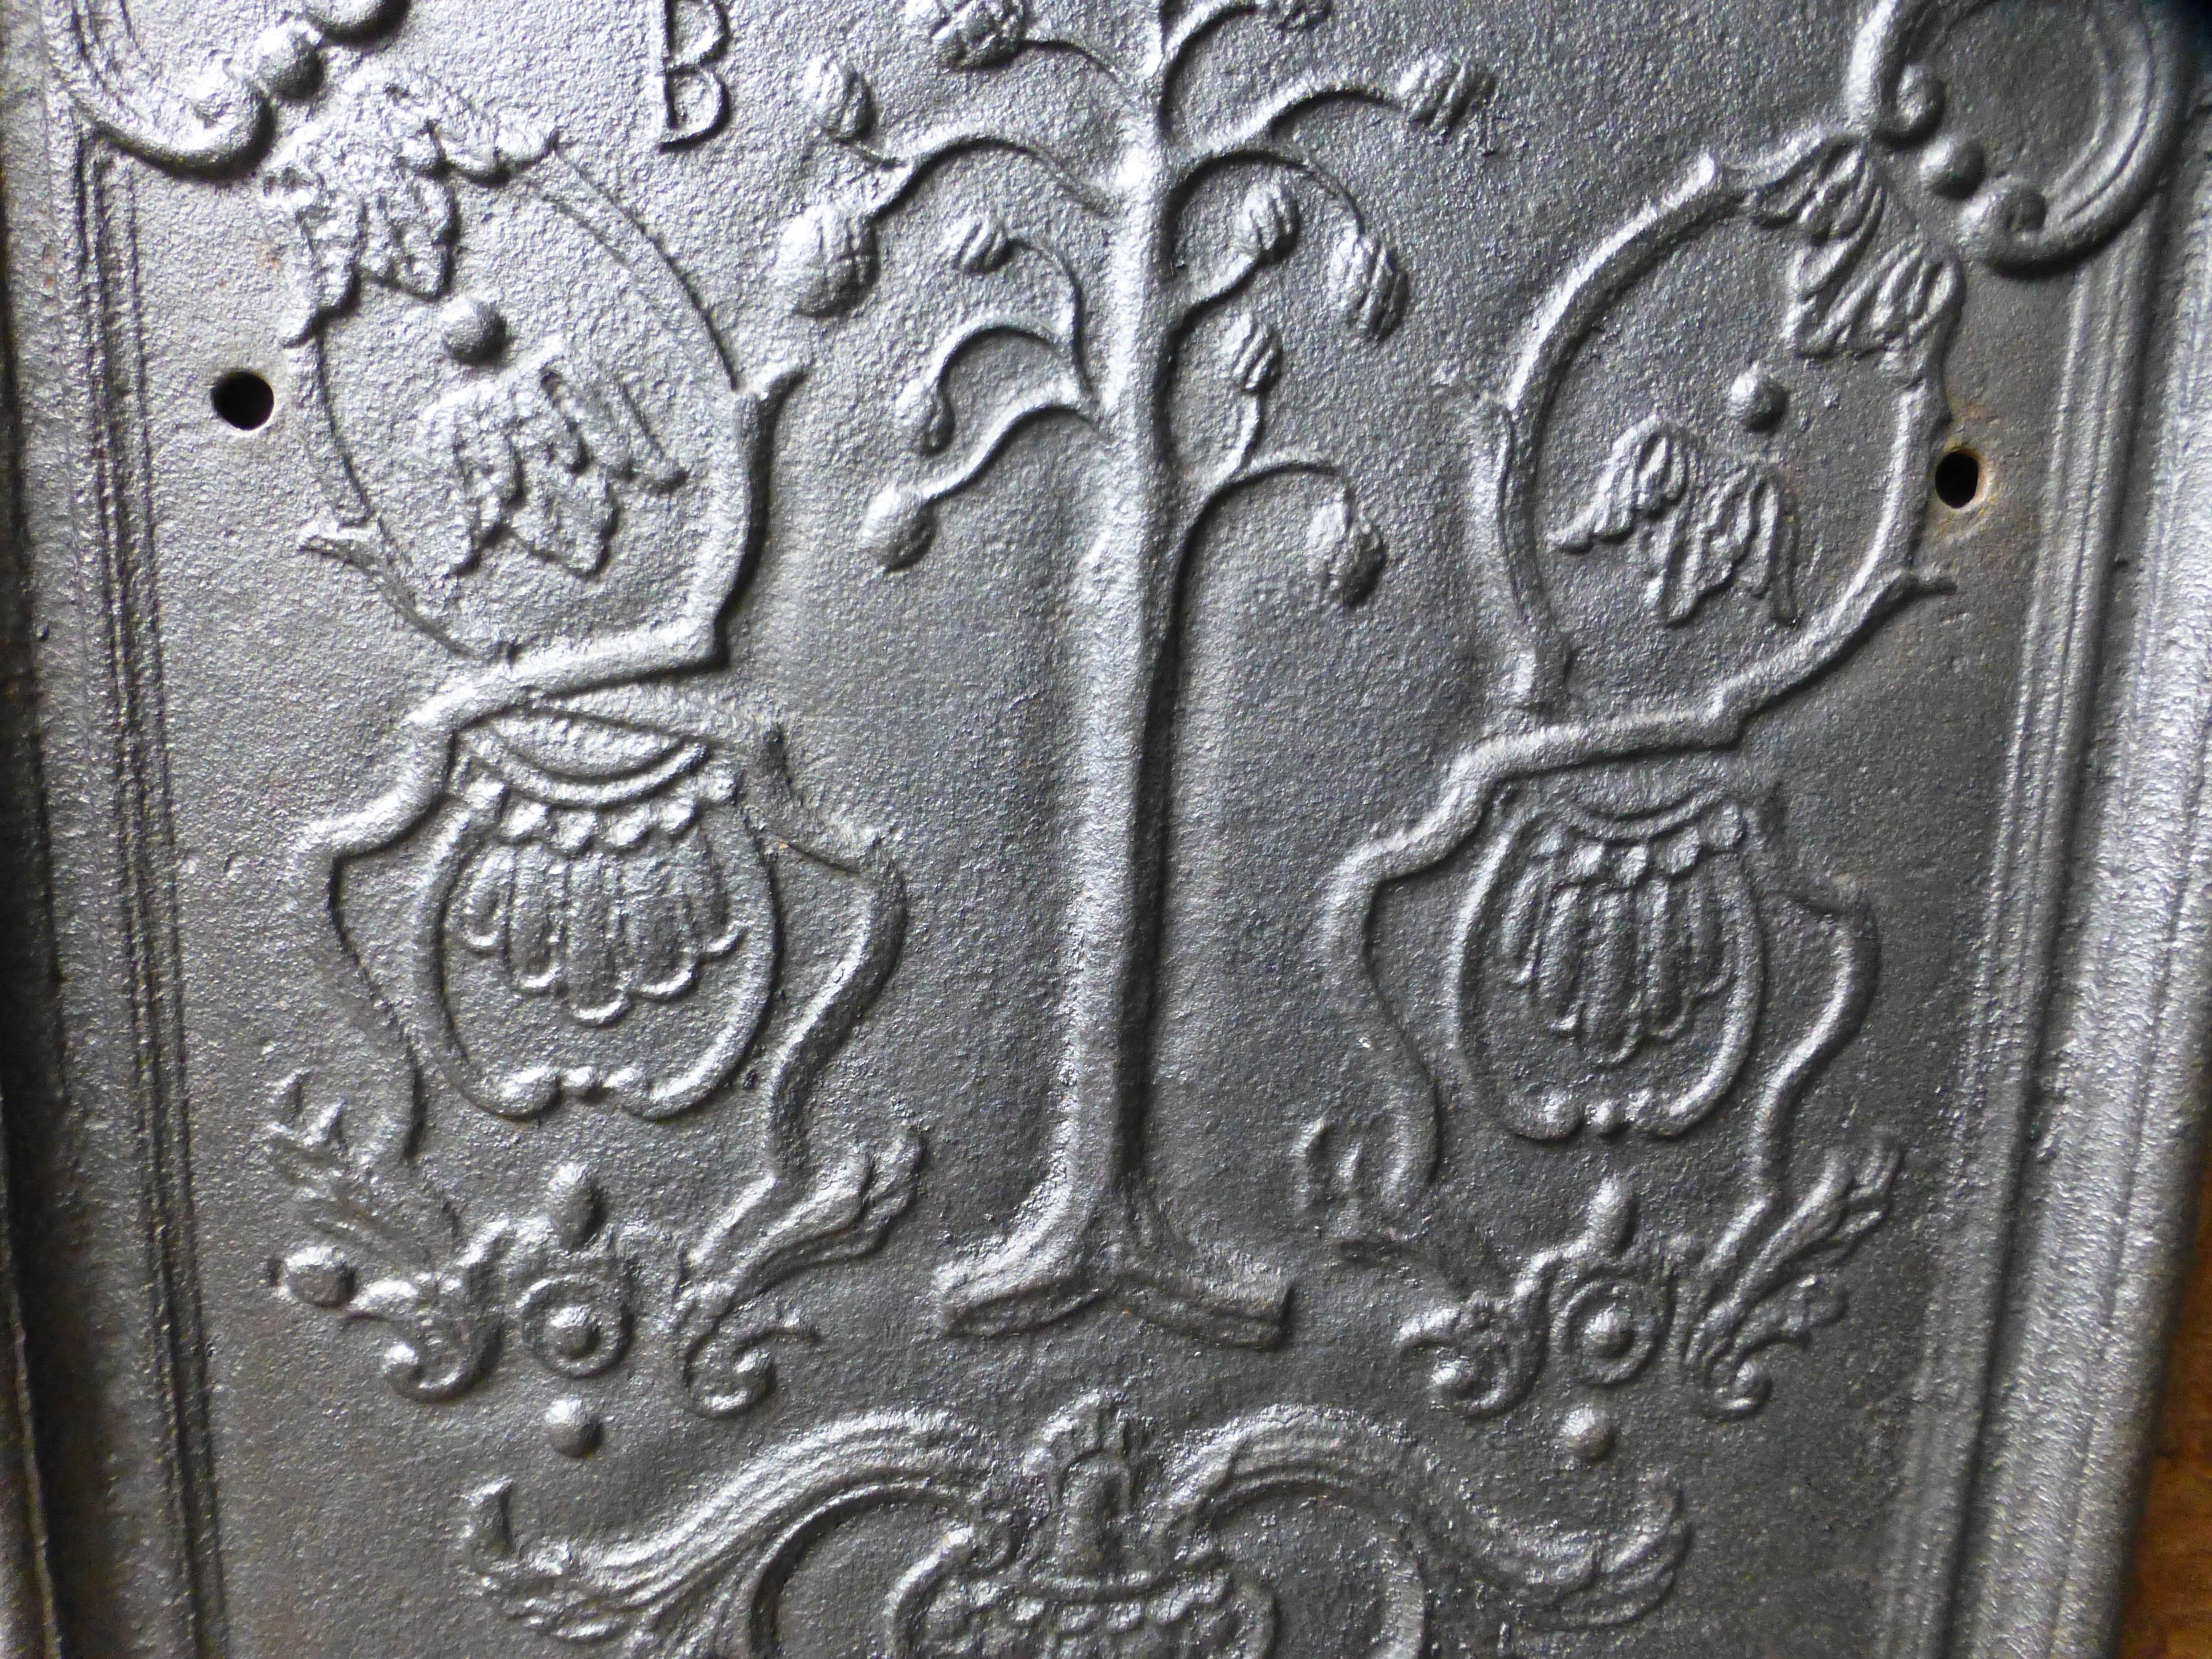 German stove plate cast in the Lohnberger Foundry in 1776.